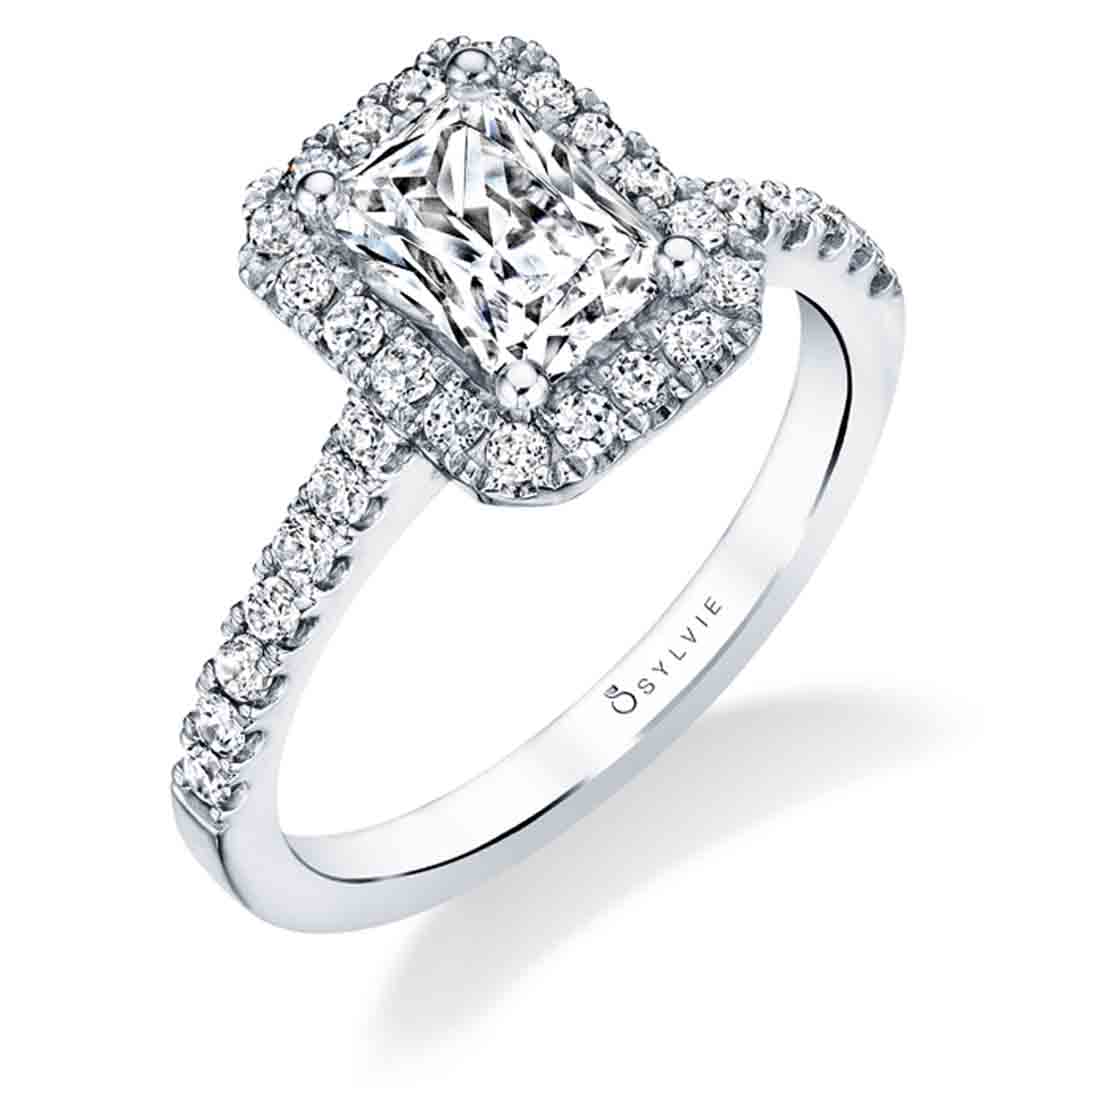 Classic Engagement Ring with Halo - Emma Stuart Benjamin & Co. Jewelry Designs San Diego, CA